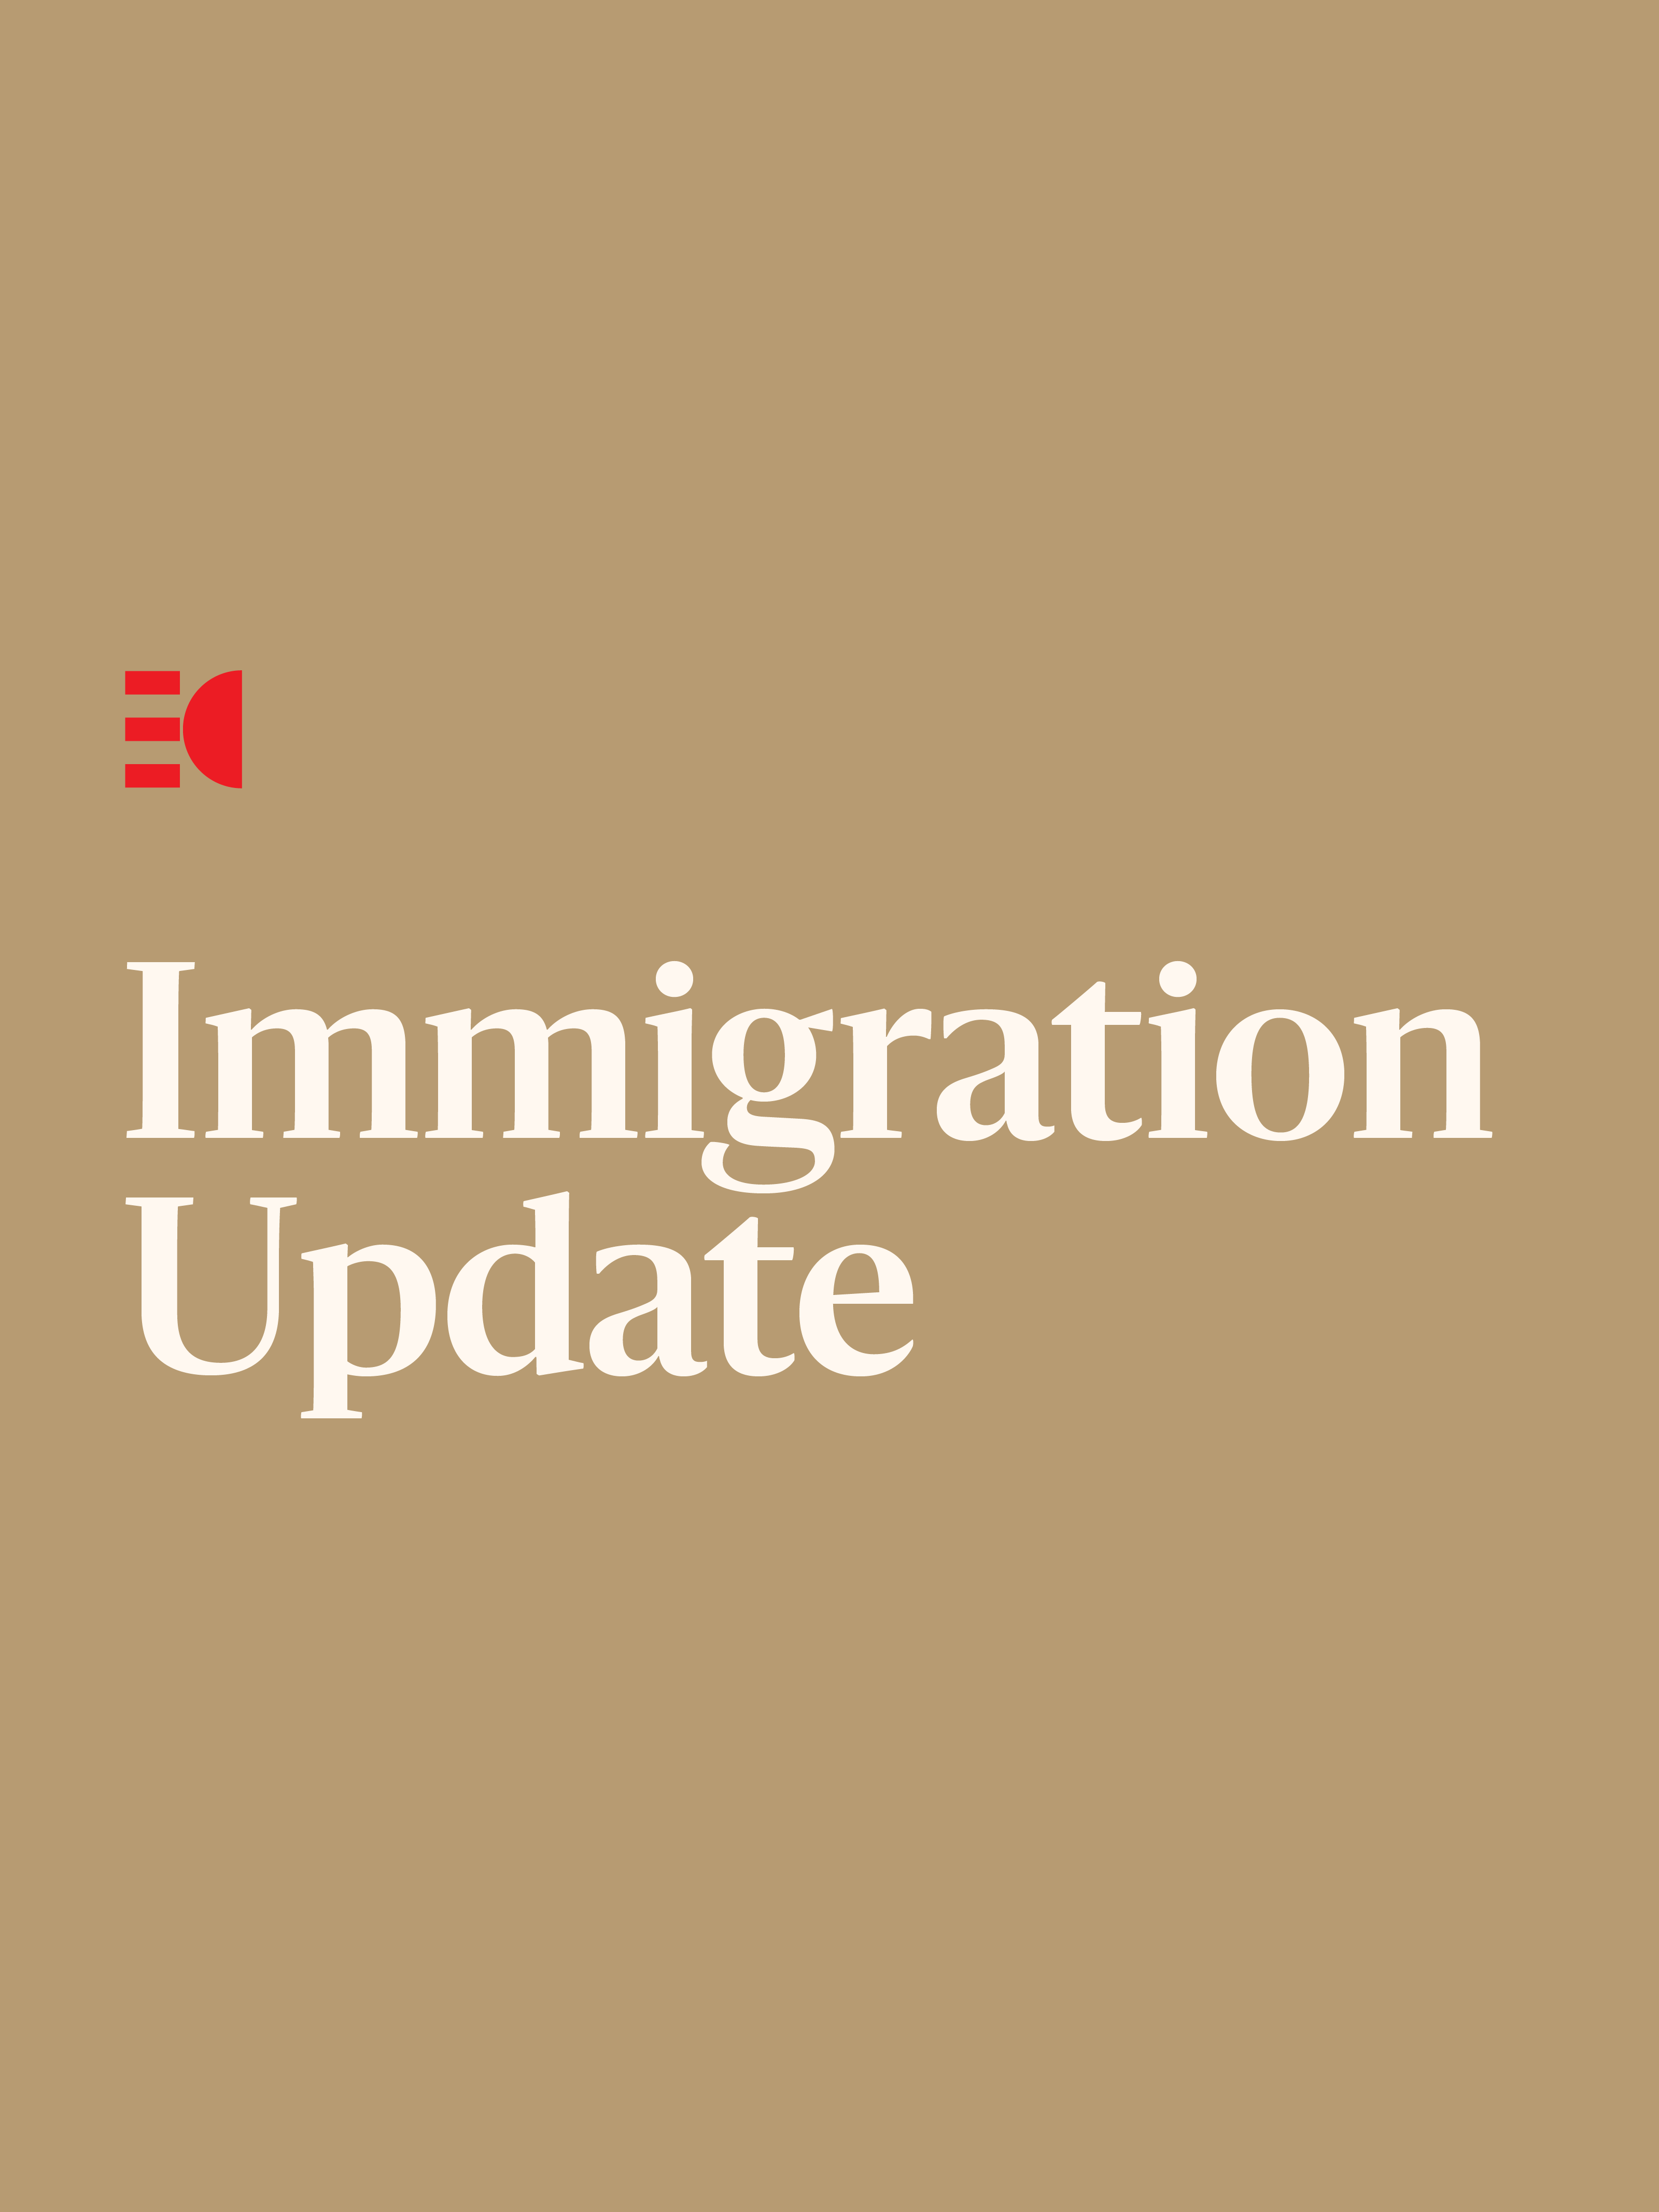 Abstract graphic with text: Immigration Update